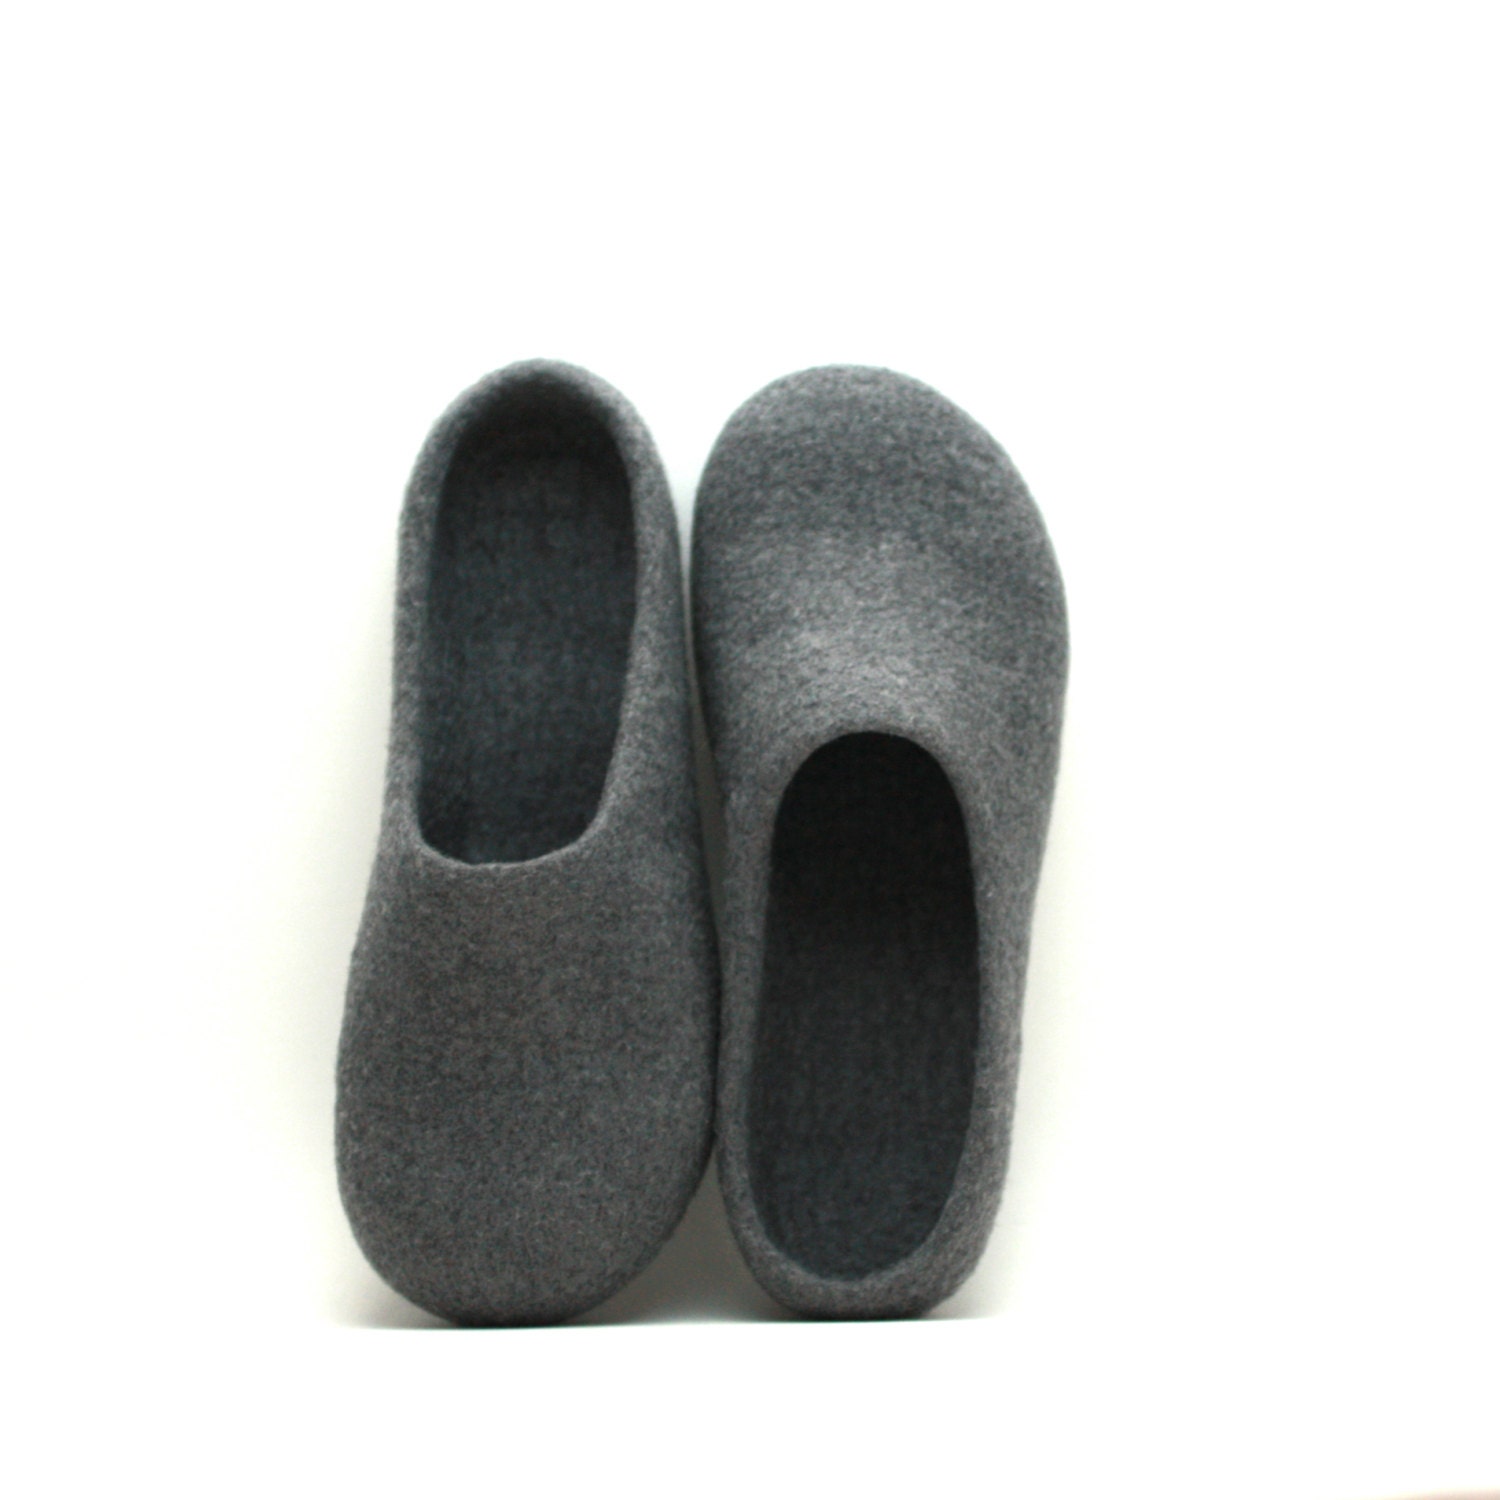 Felted wool grey slippers - handmade wool clogs - made to order - valentines day gift